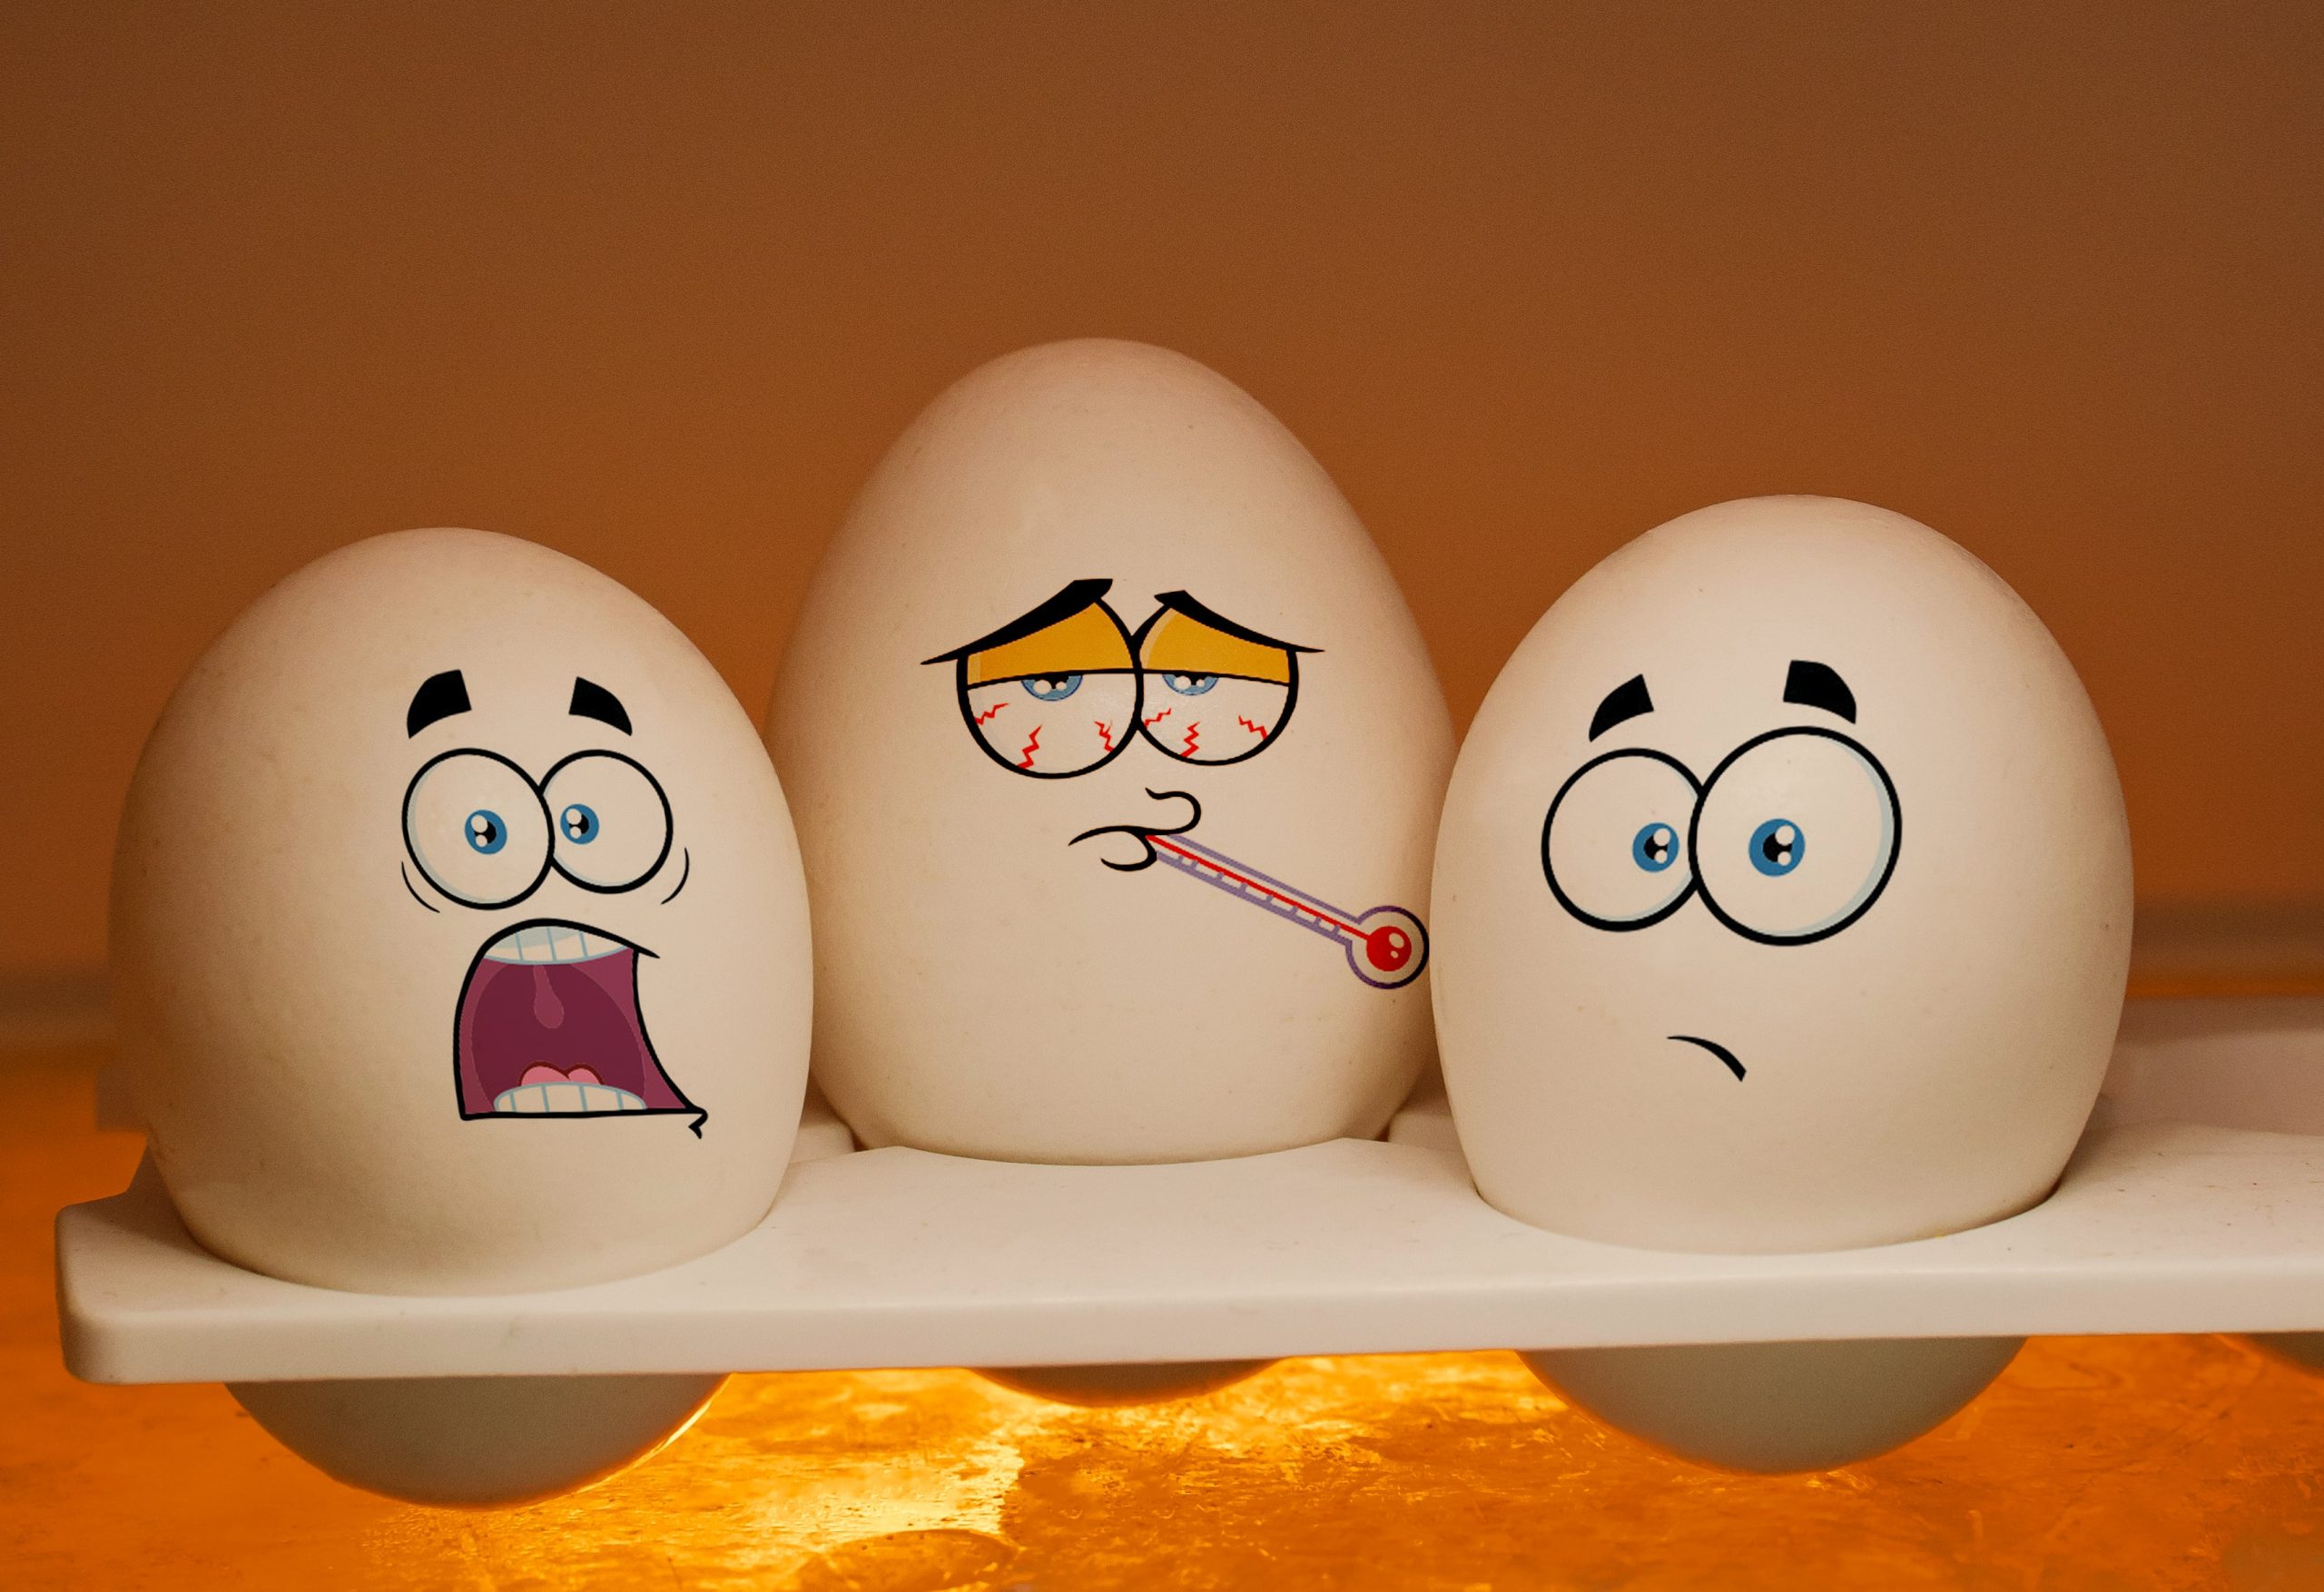 emotion-filled cartoon faces painted on eggs